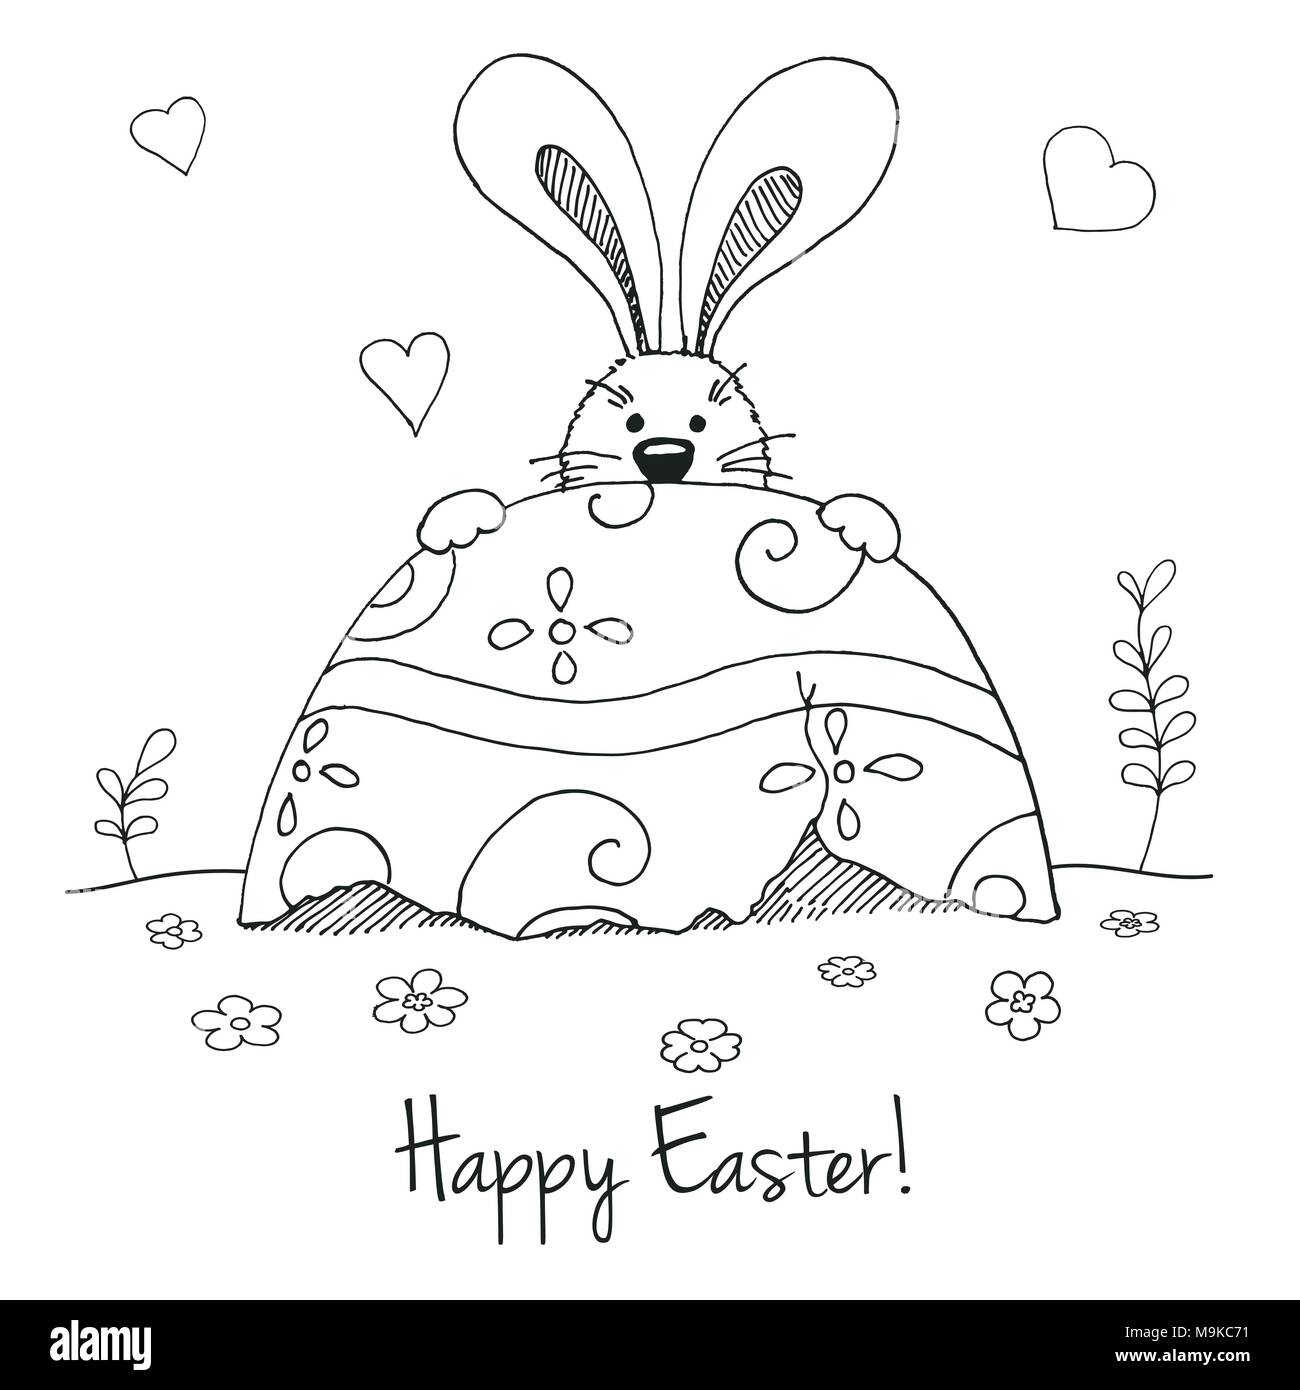 Easter Egg With Rabbit Ears Decoration Vector Illustration Sketch Design  Royalty Free SVG, Cliparts, Vectors, and Stock Illustration. Image 95761928.